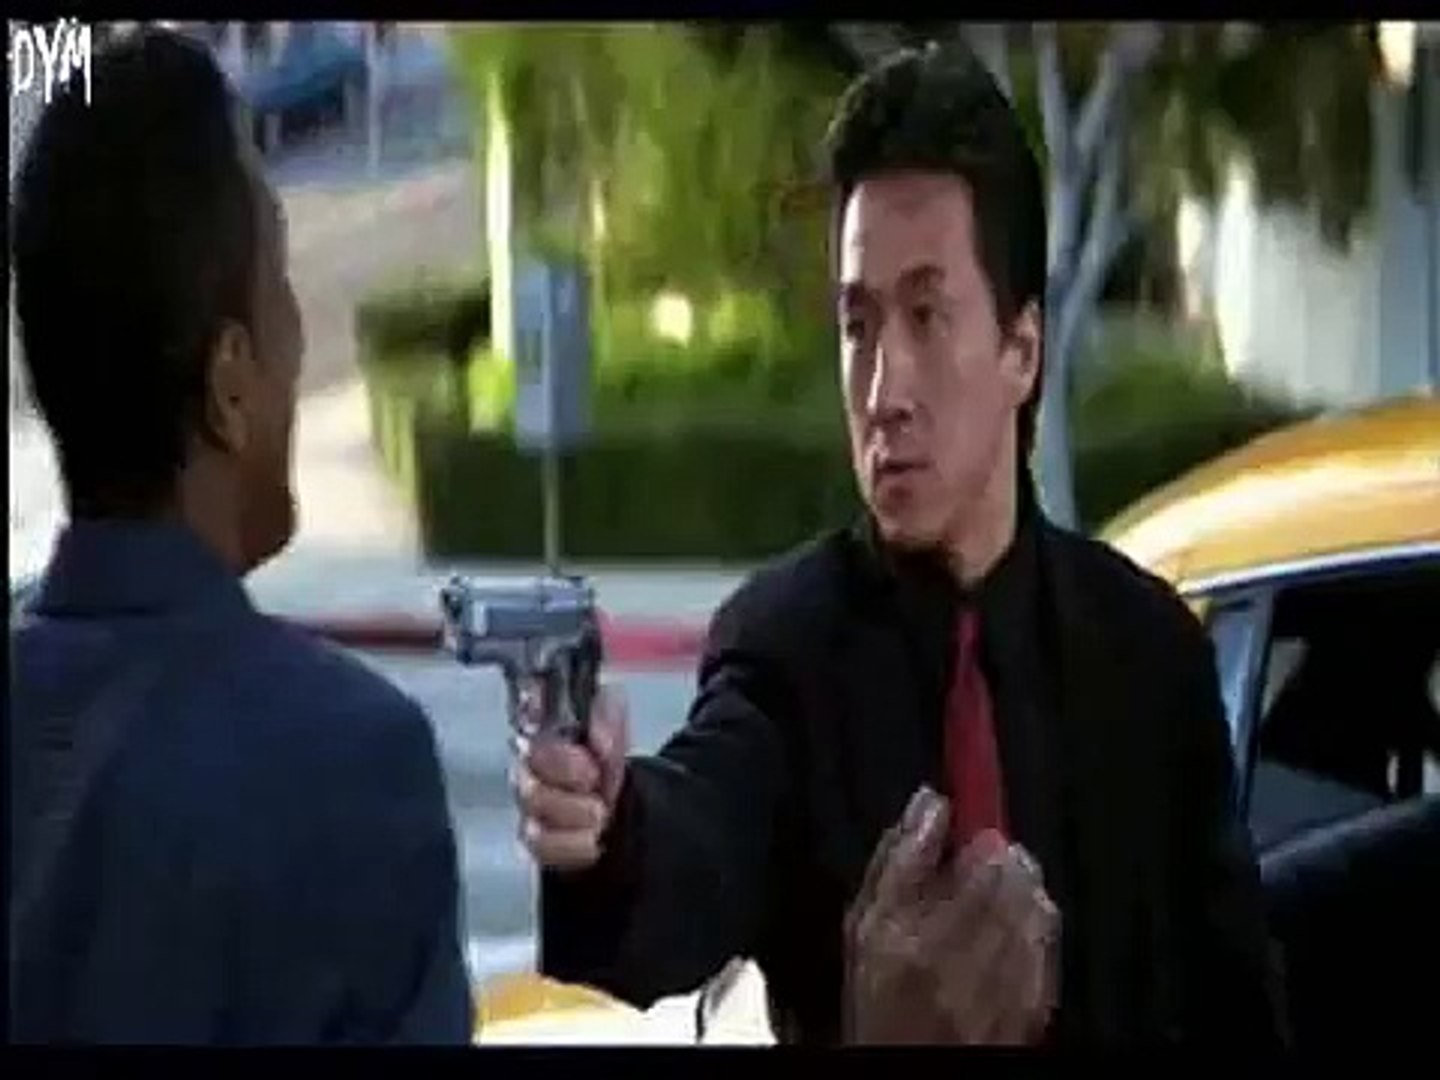 Rush Hour Funny Scenes - video Dailymotion